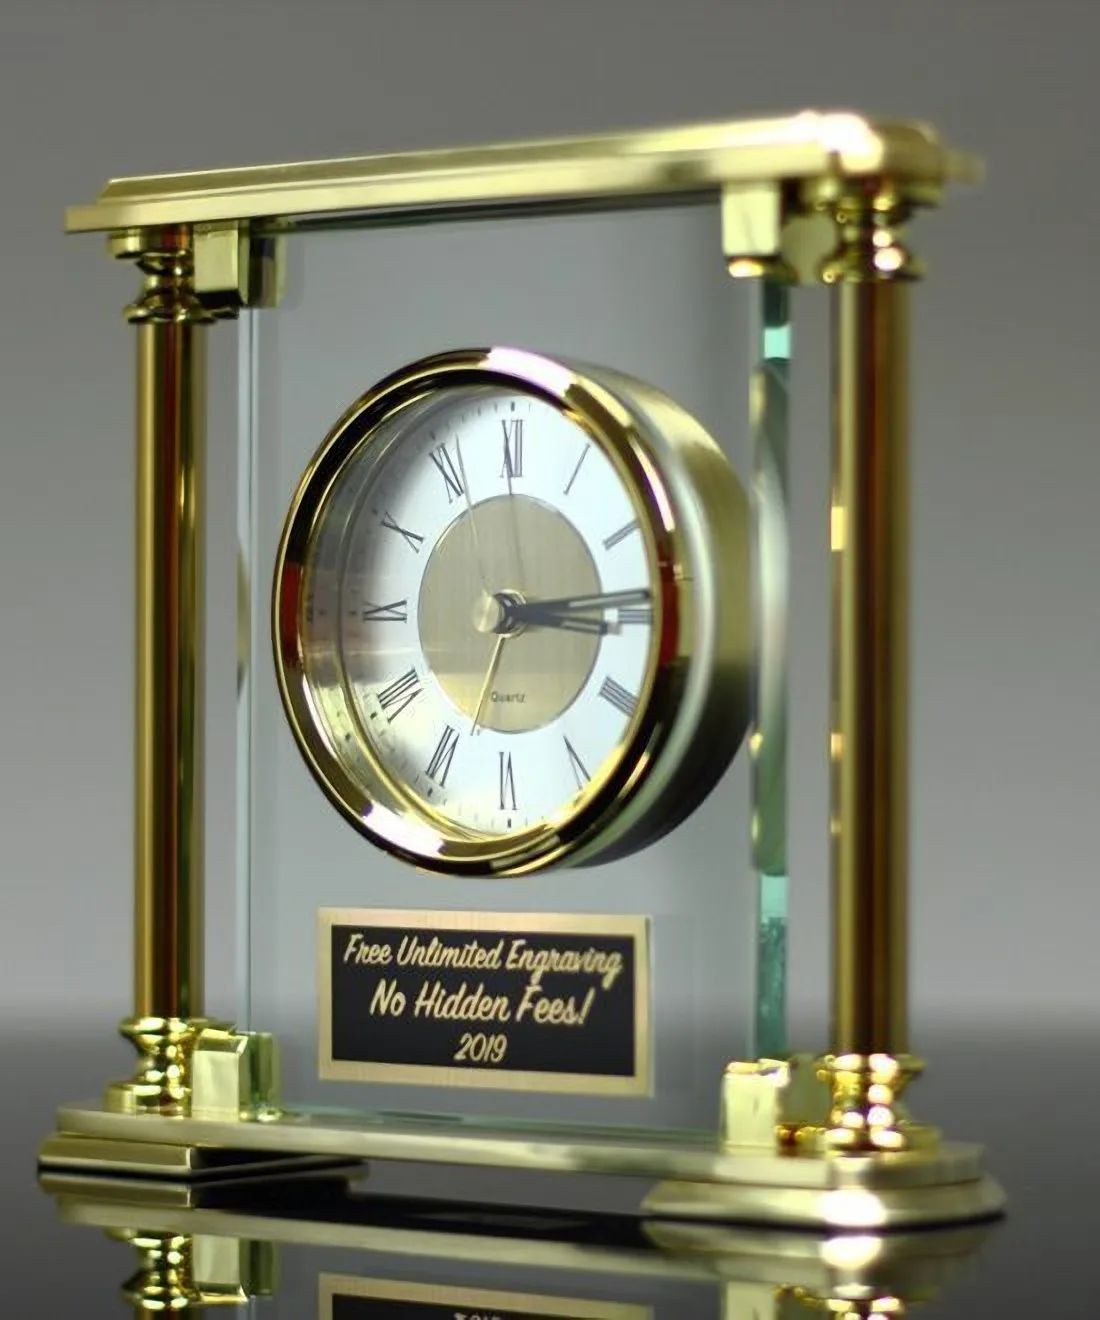 Glass and Brass Mantle Clock for recognition achievement